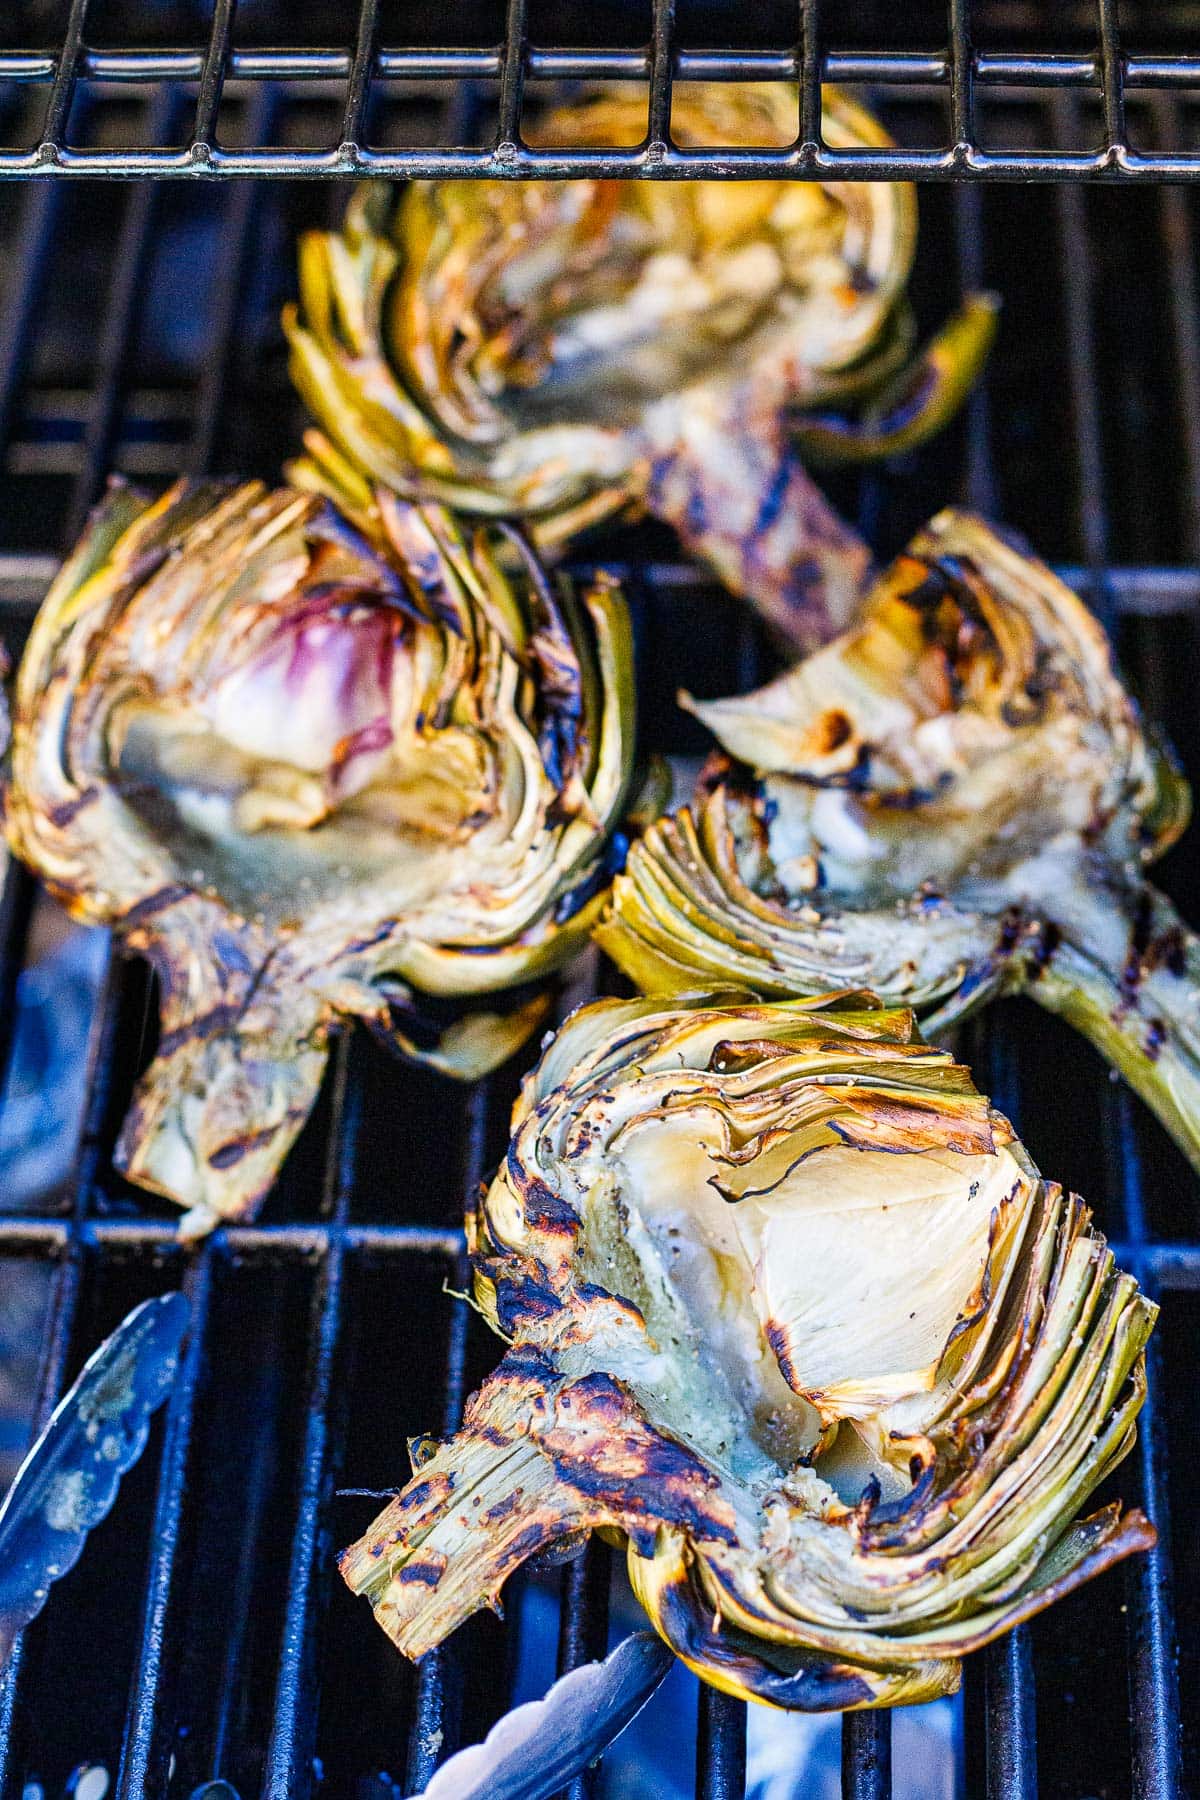 grilled artichokes face up on grill with grill marks.